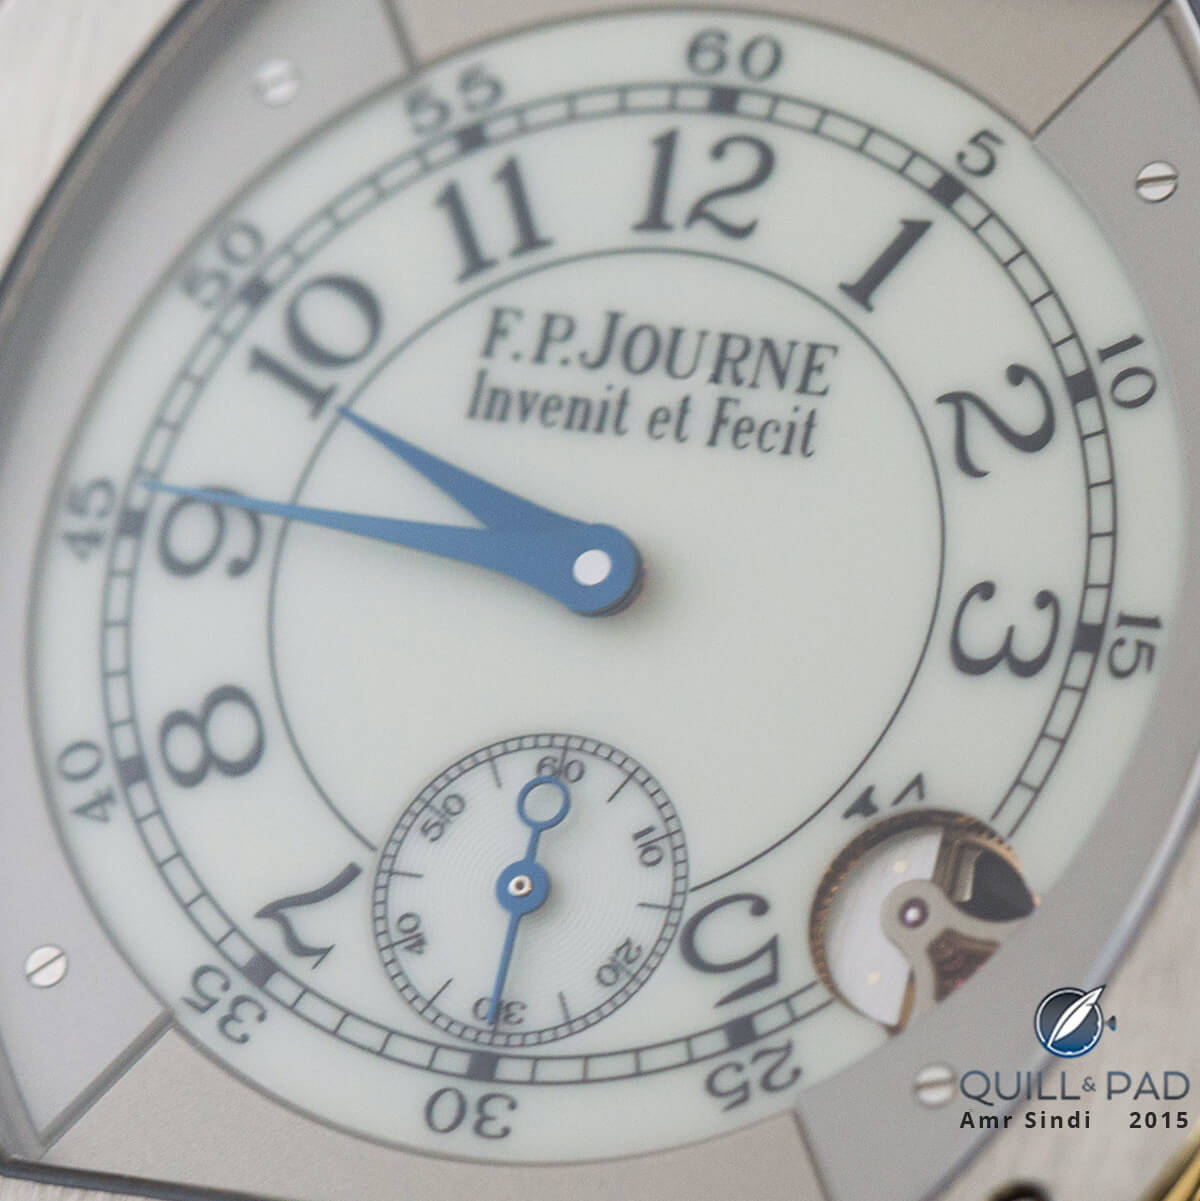 A closer look at the dial of the F.P. Journe Élégante 48 mm